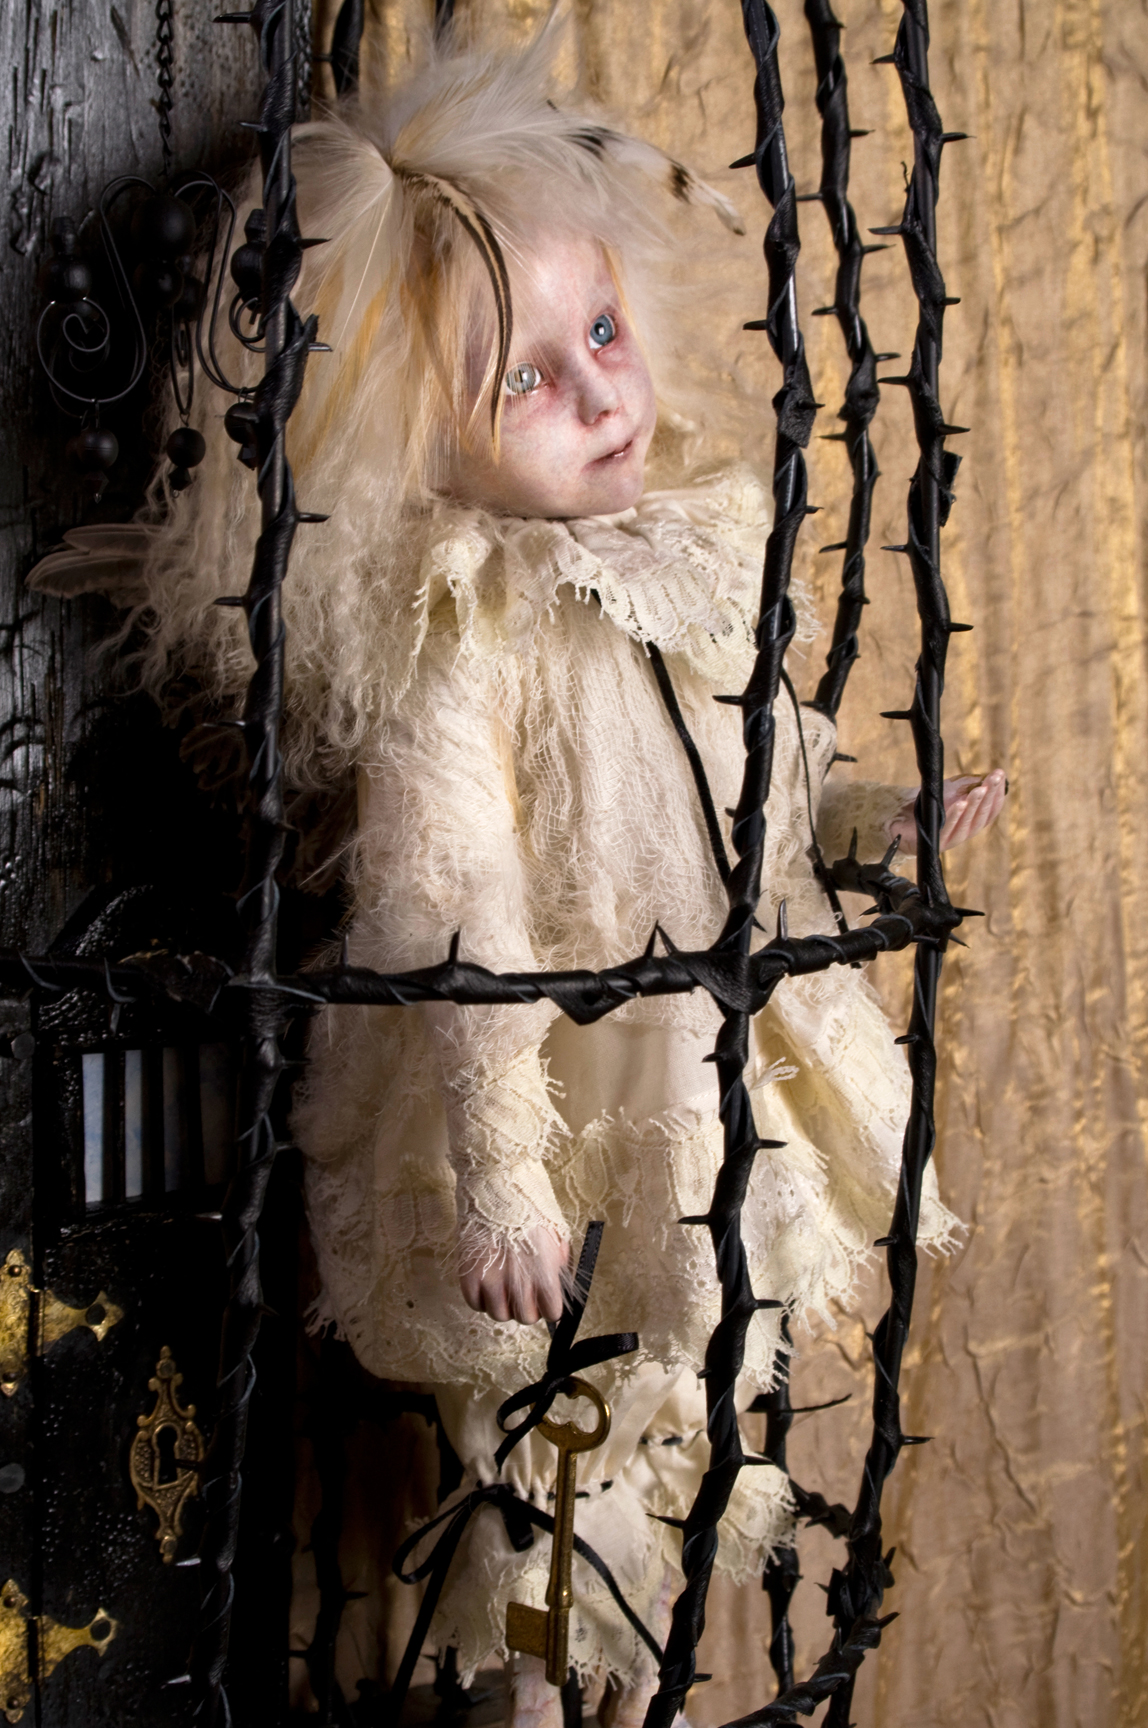 blond feathered pale gothic artdoll wearing white lace in a black thorn cage